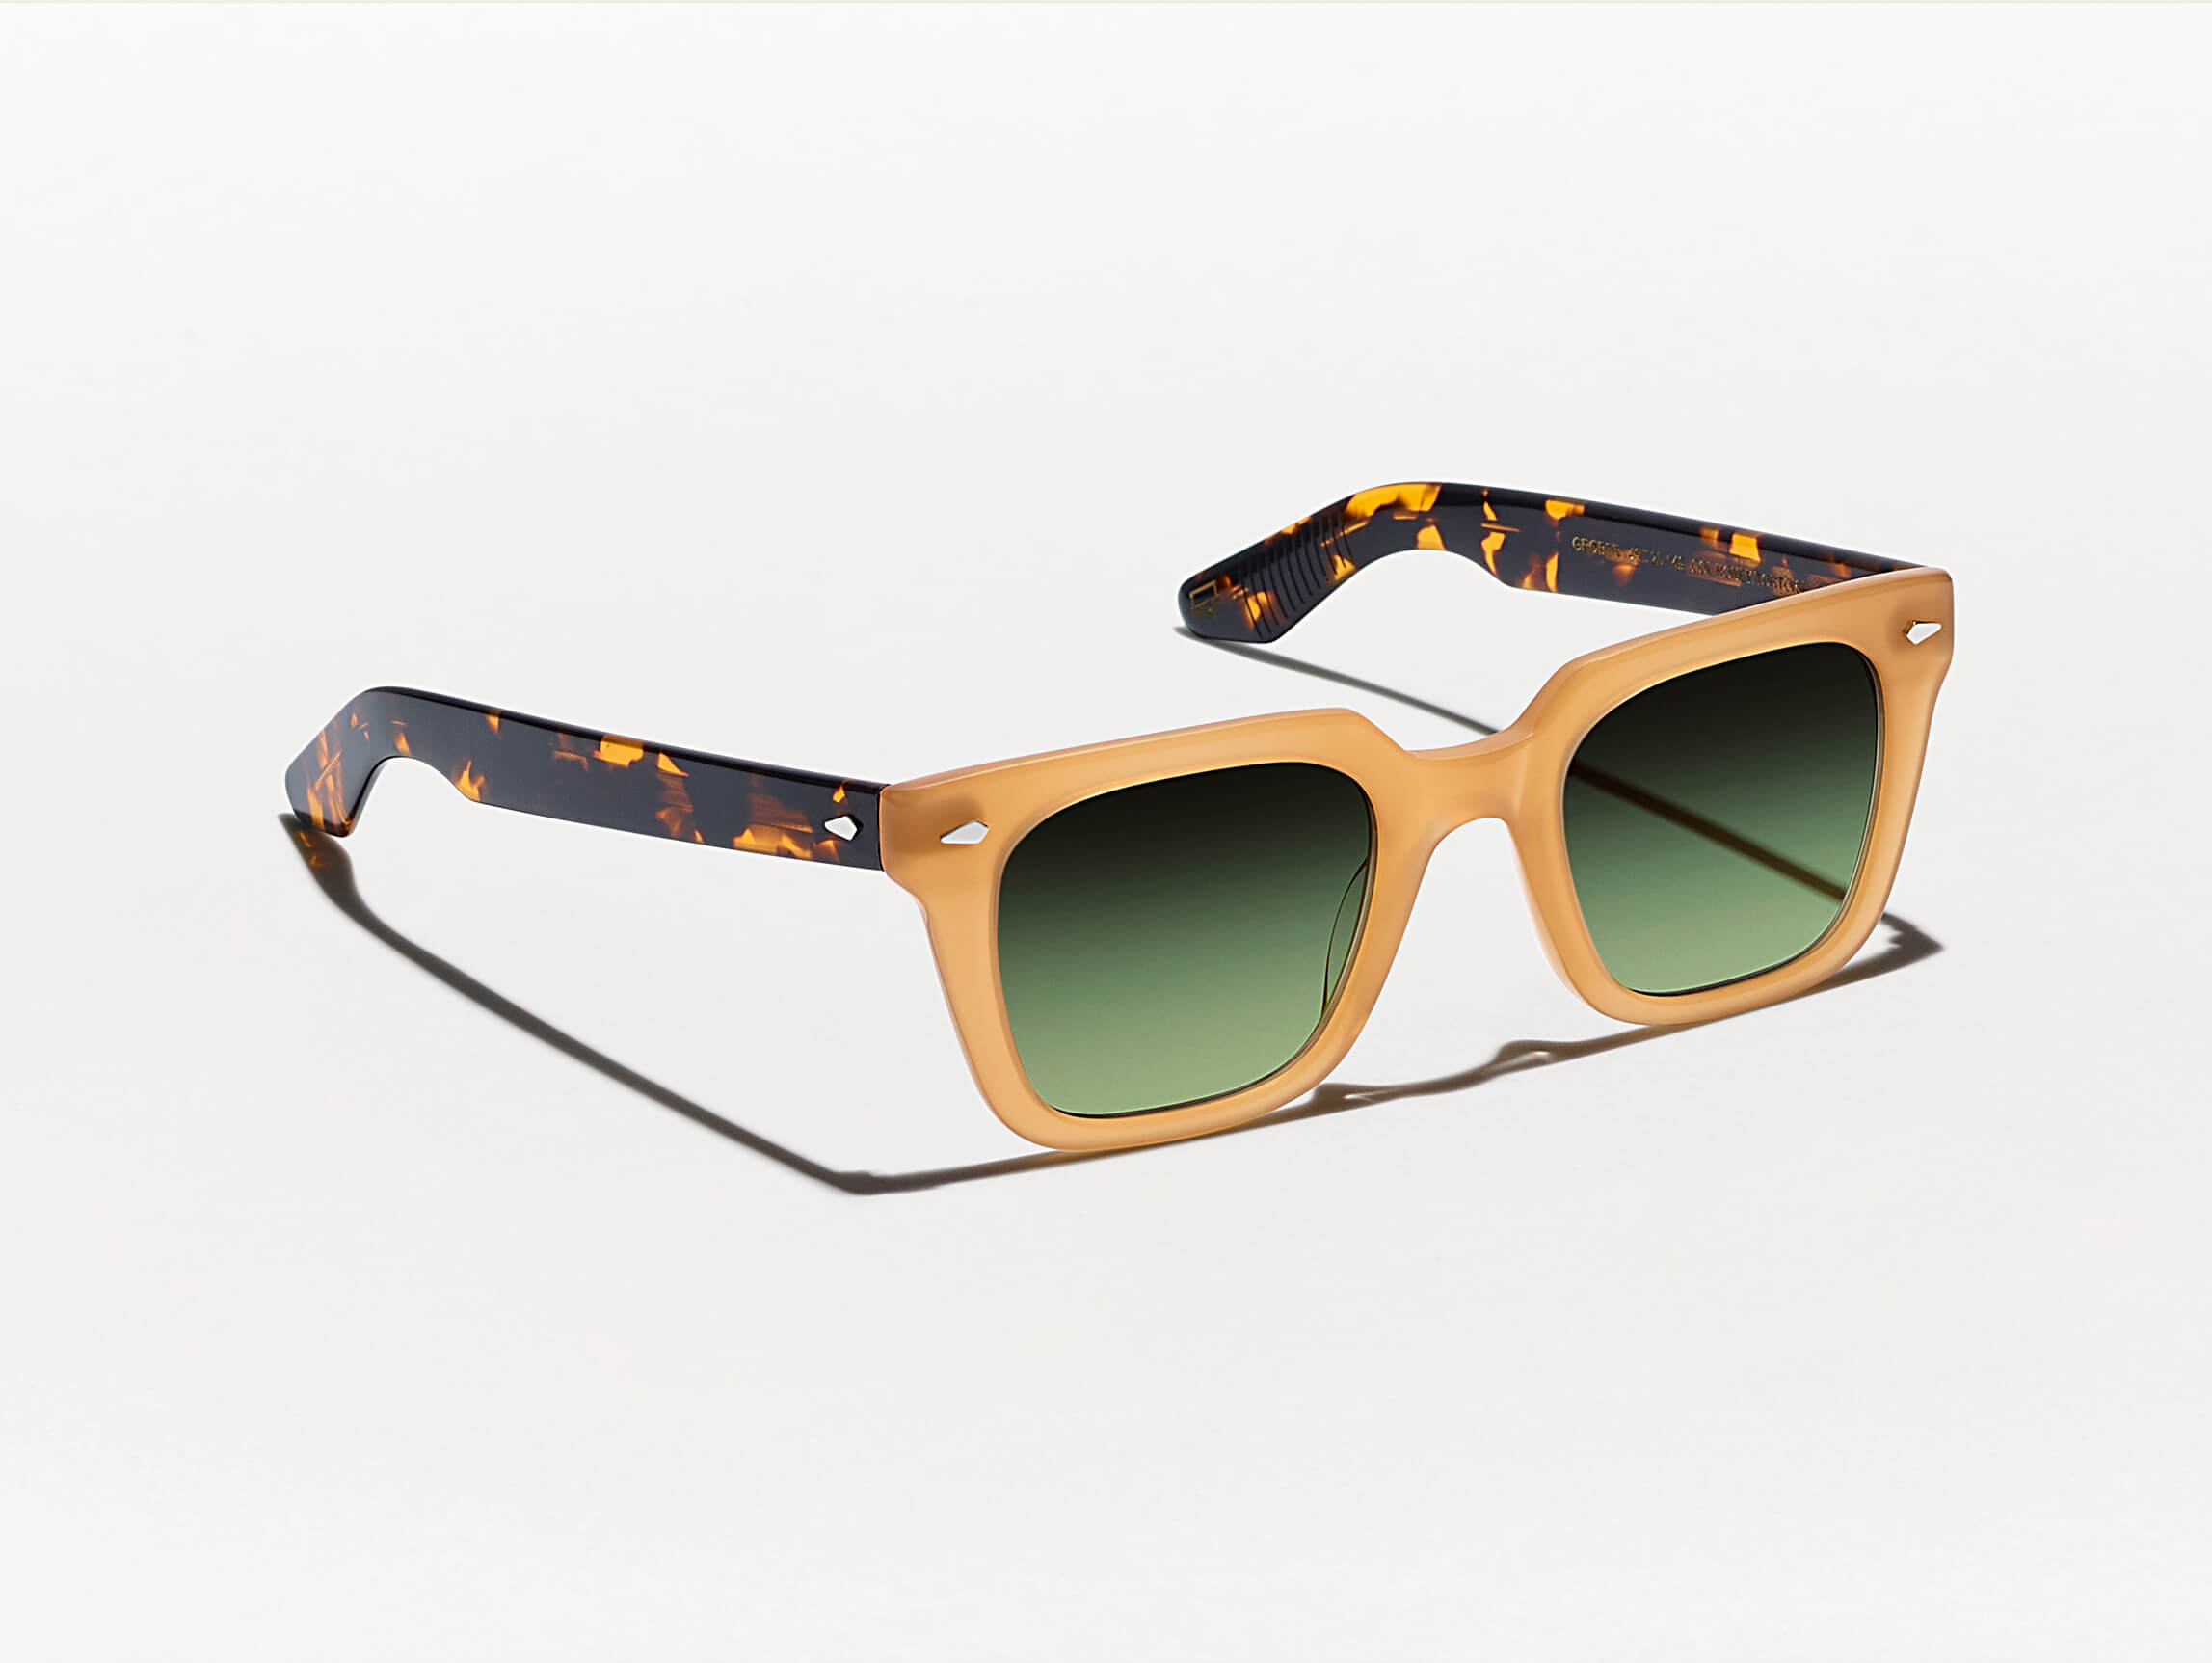 The GROBER SUN in Honey/Tortoise with Forest Wood Tinted Lenses